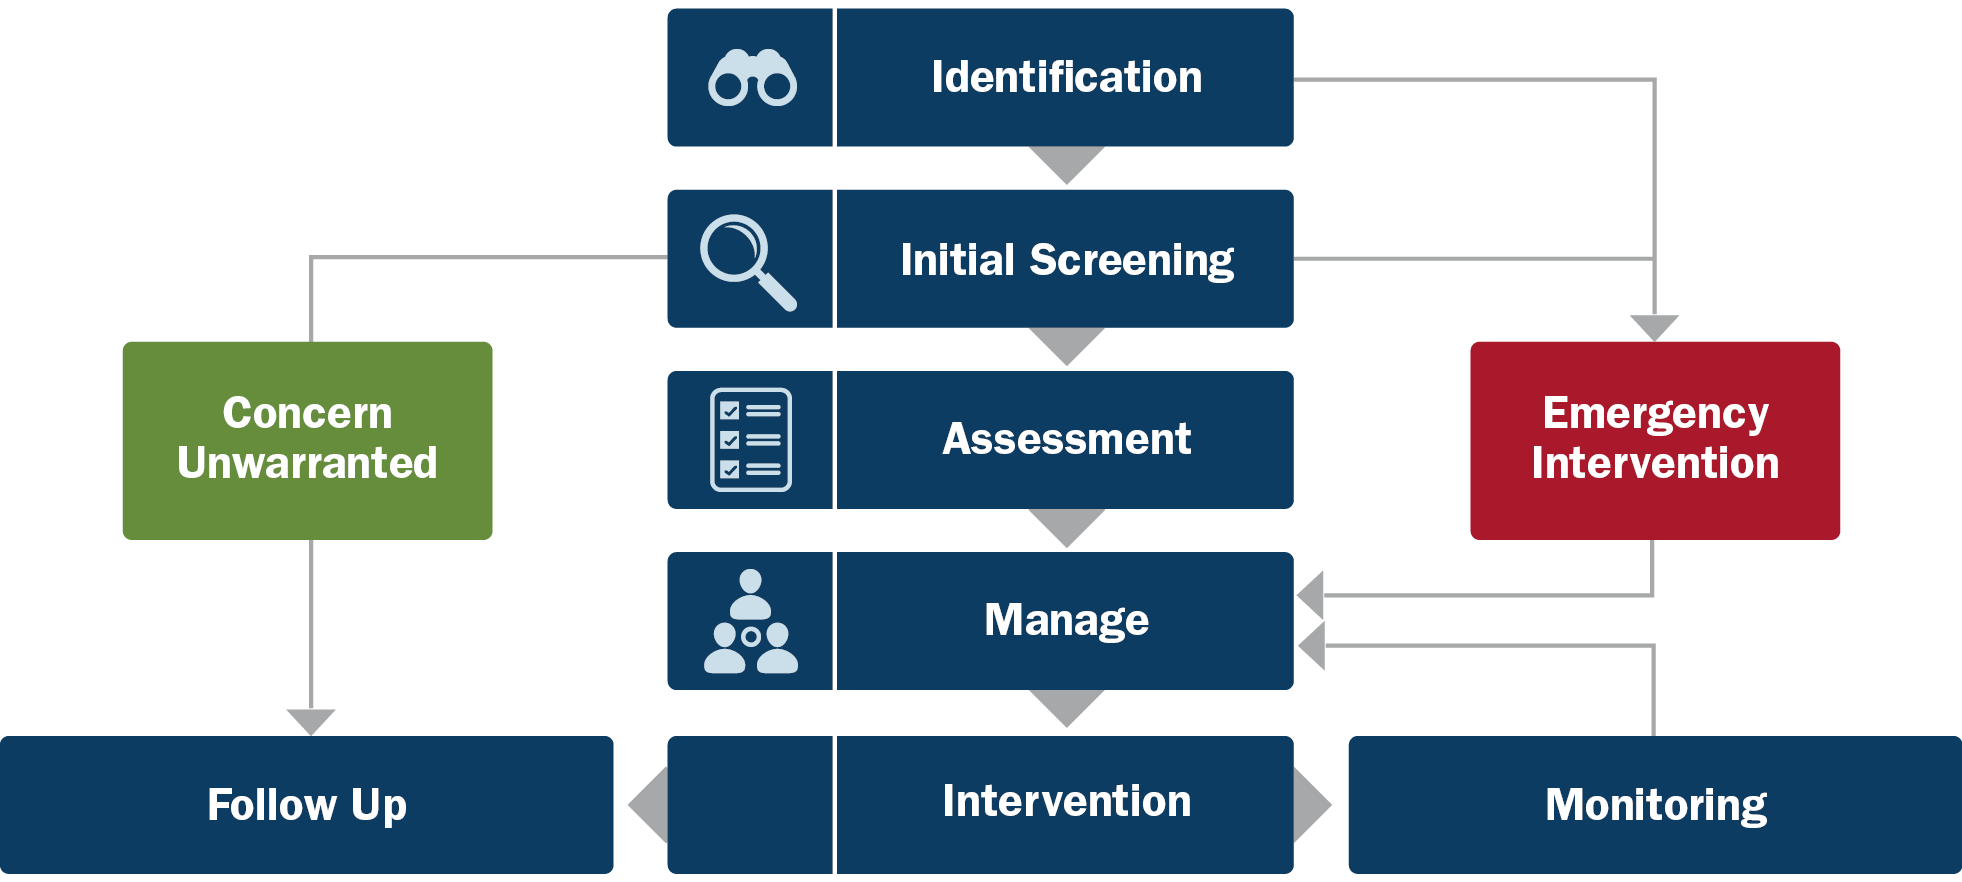 The process includes 1) Identification, 2) Initial Screening, 3) Assessment, 4) Manage, and 5) Intervention. There are additional steps following intervention: Follow Up or Monitoring. If emergency intervention is needed, begin with identification and skip to Manage. If concern is unwarranted, skip from initial screening to follow up. Refer back to Manage if monitoring a threat. 